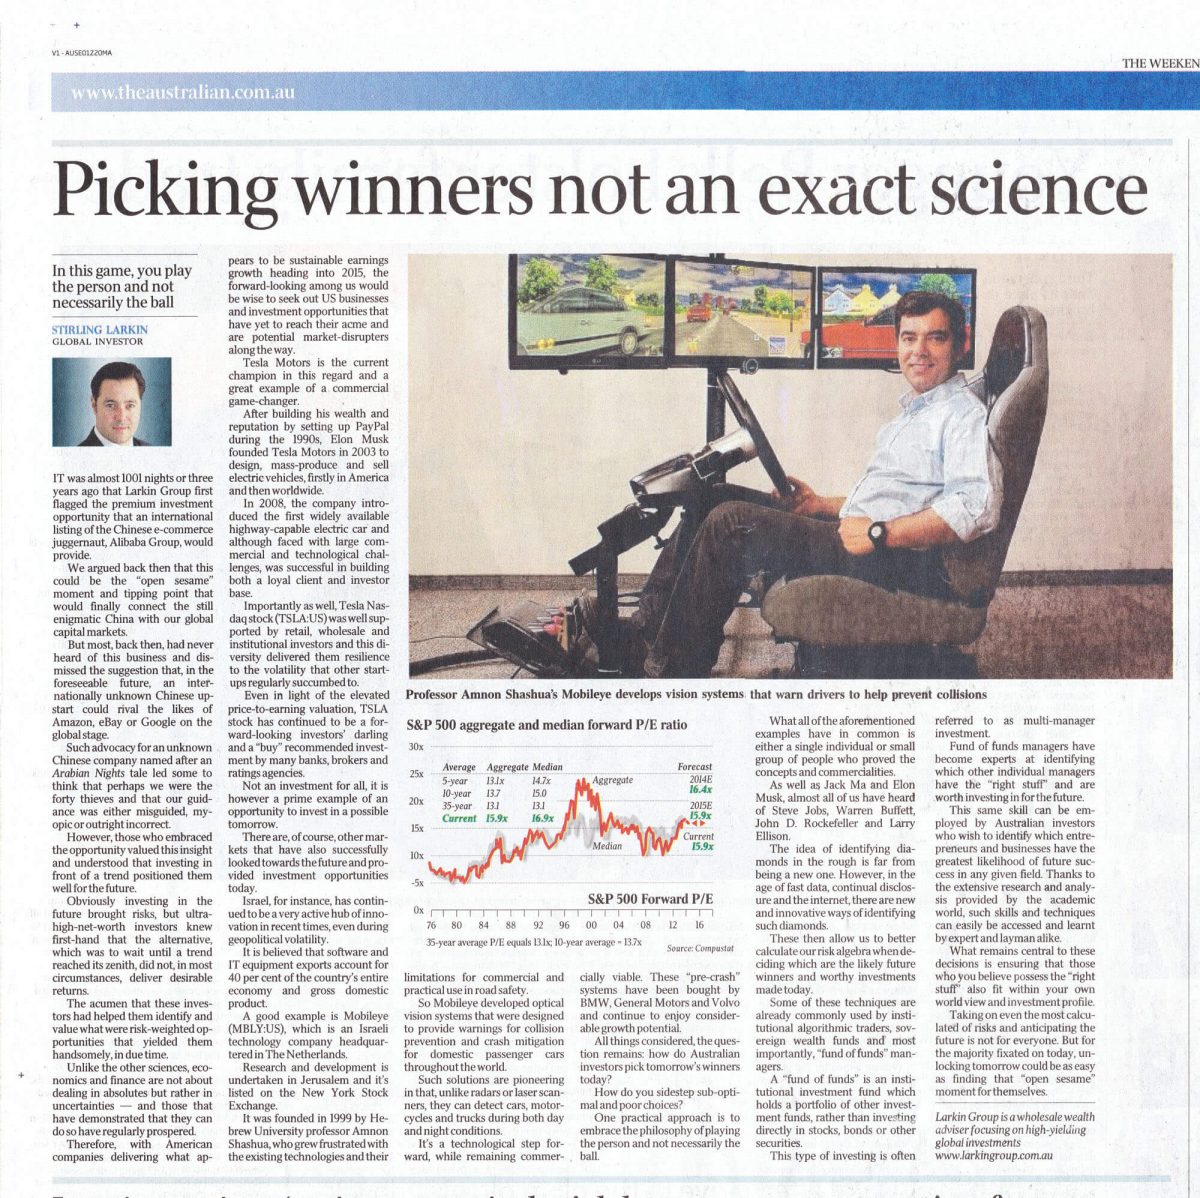 australian standfirst discusses mmarkets in israel in 2014 in the australian newspaper